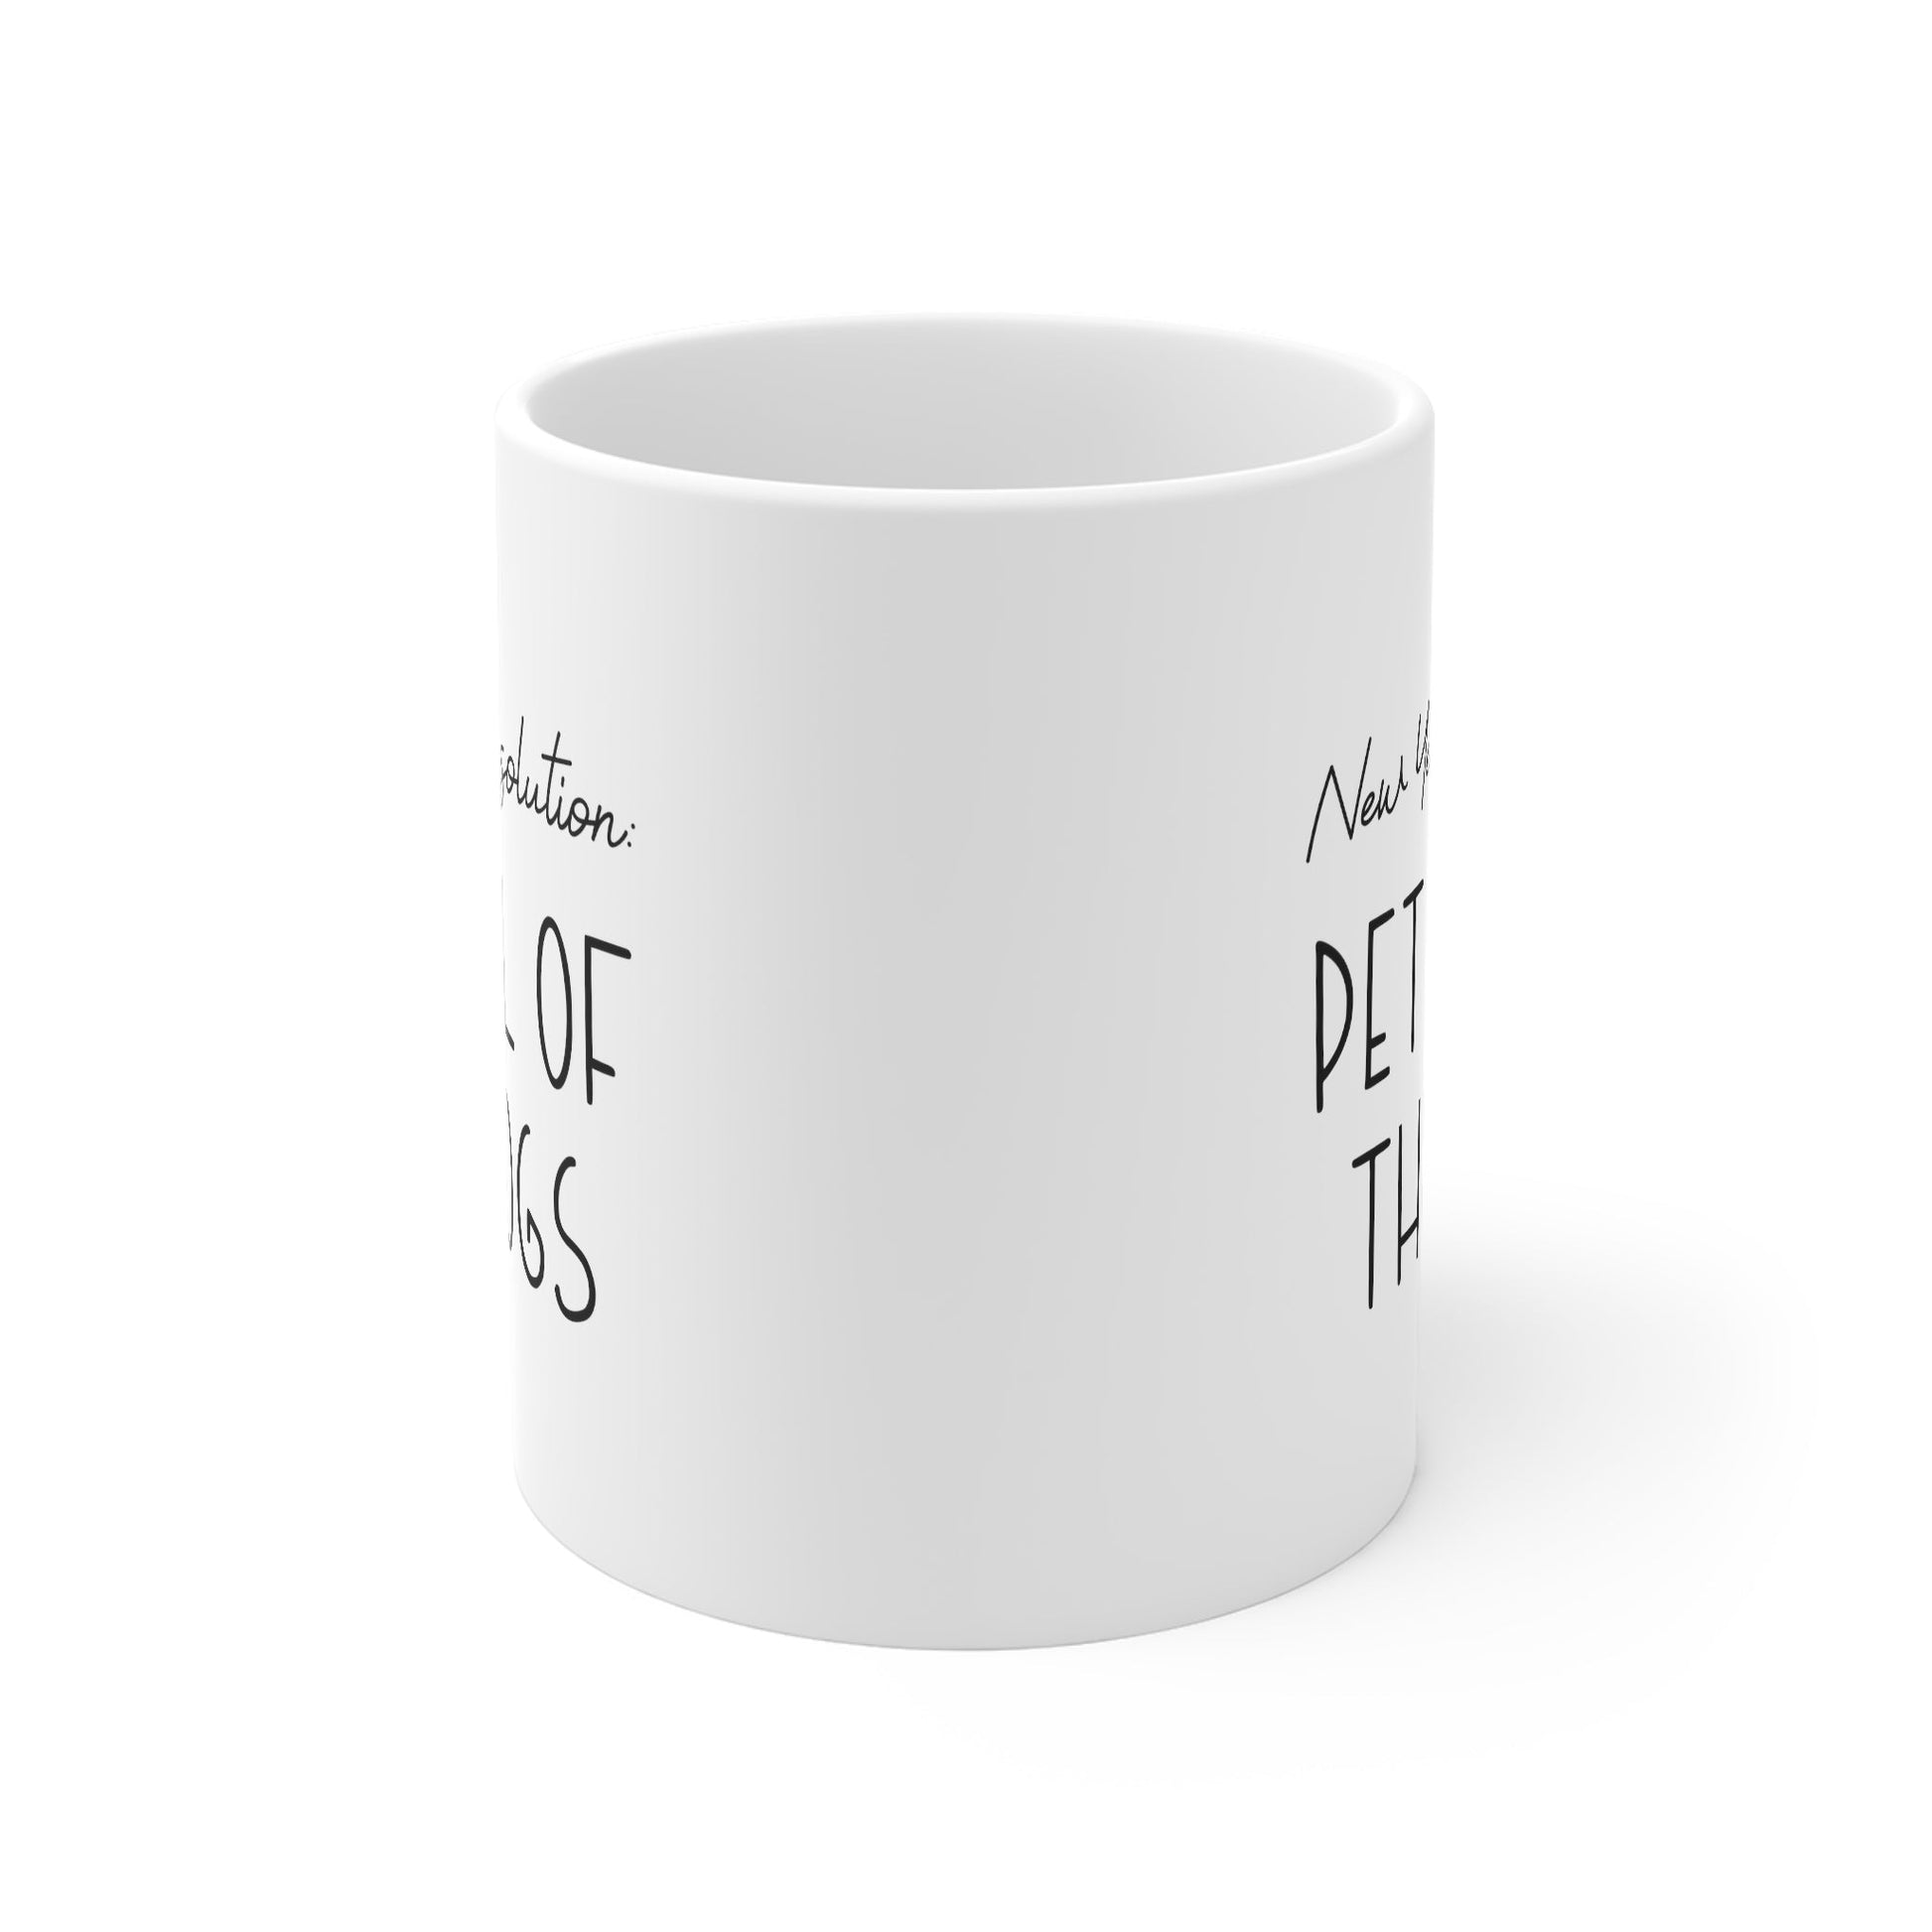 New Year's Resolution: Pet All Of The Dogs | 11oz Mug - Detezi Designs-27792226495740397252